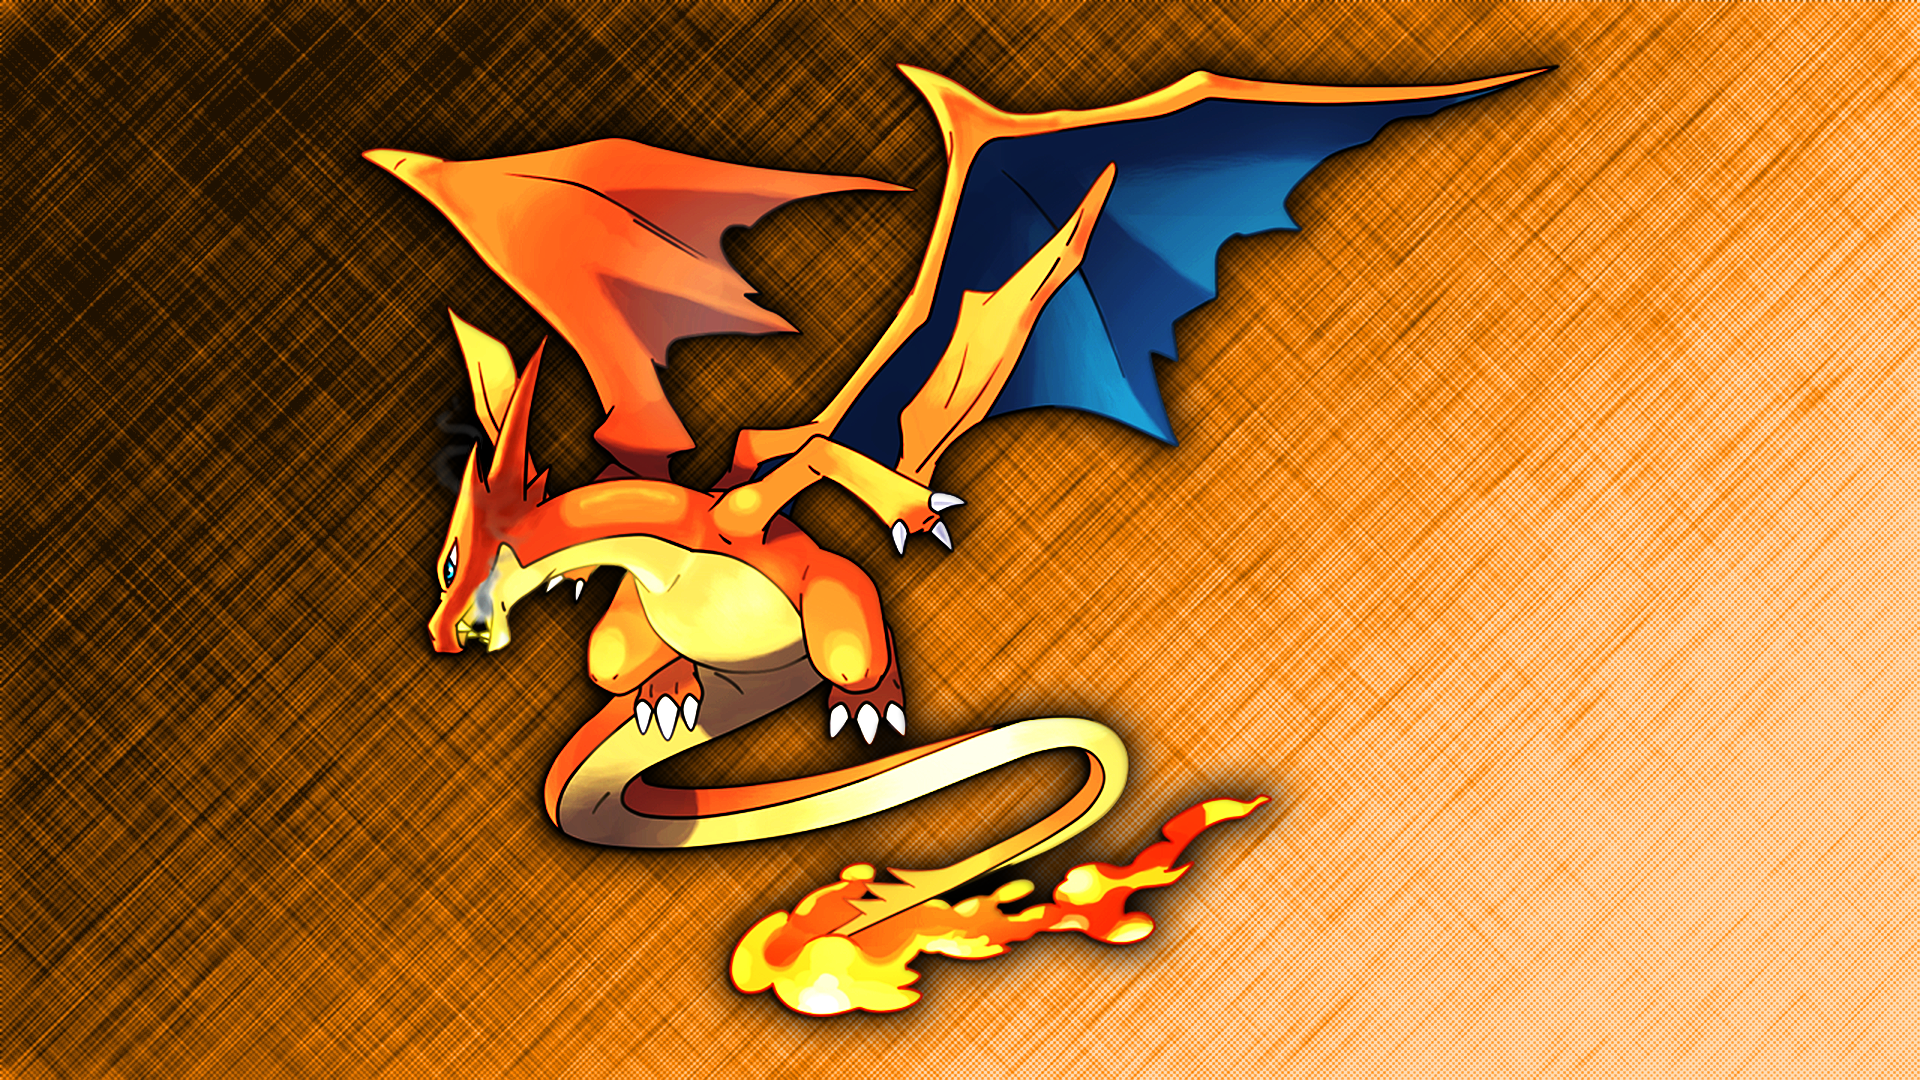 Charizard Background for Computer